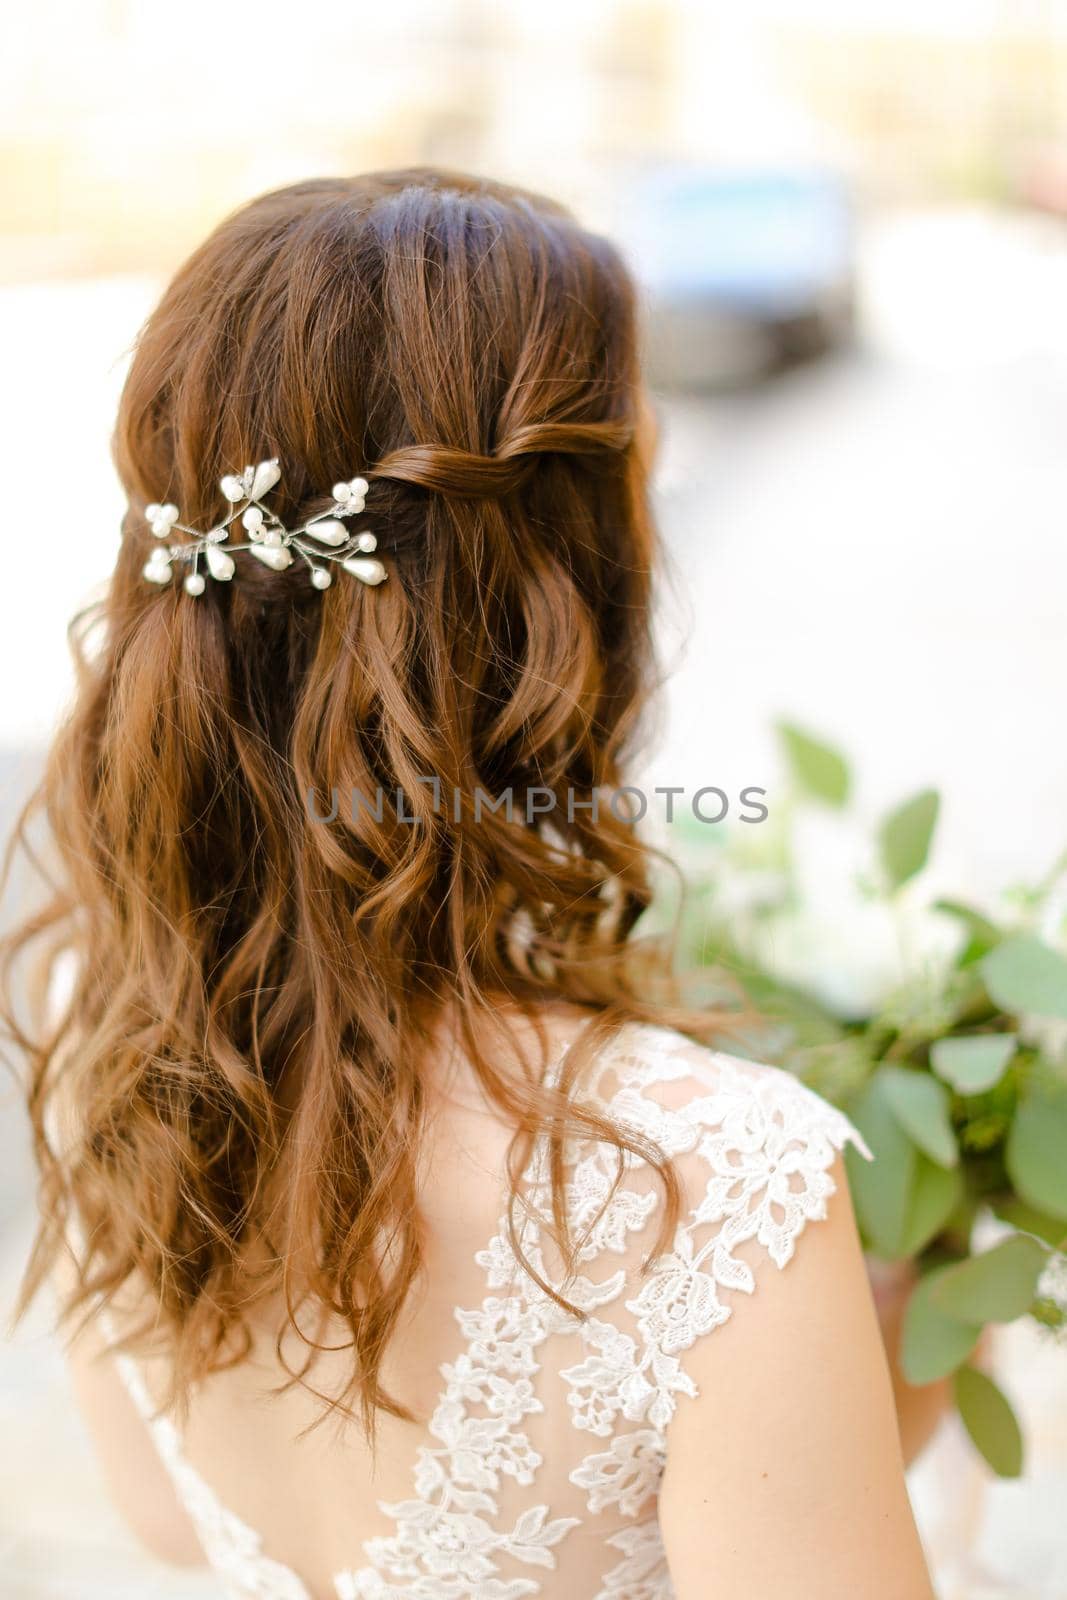 Back view of nice brown curls for bride keeping flowers. Concept of wedding photo session and stylish hair do.